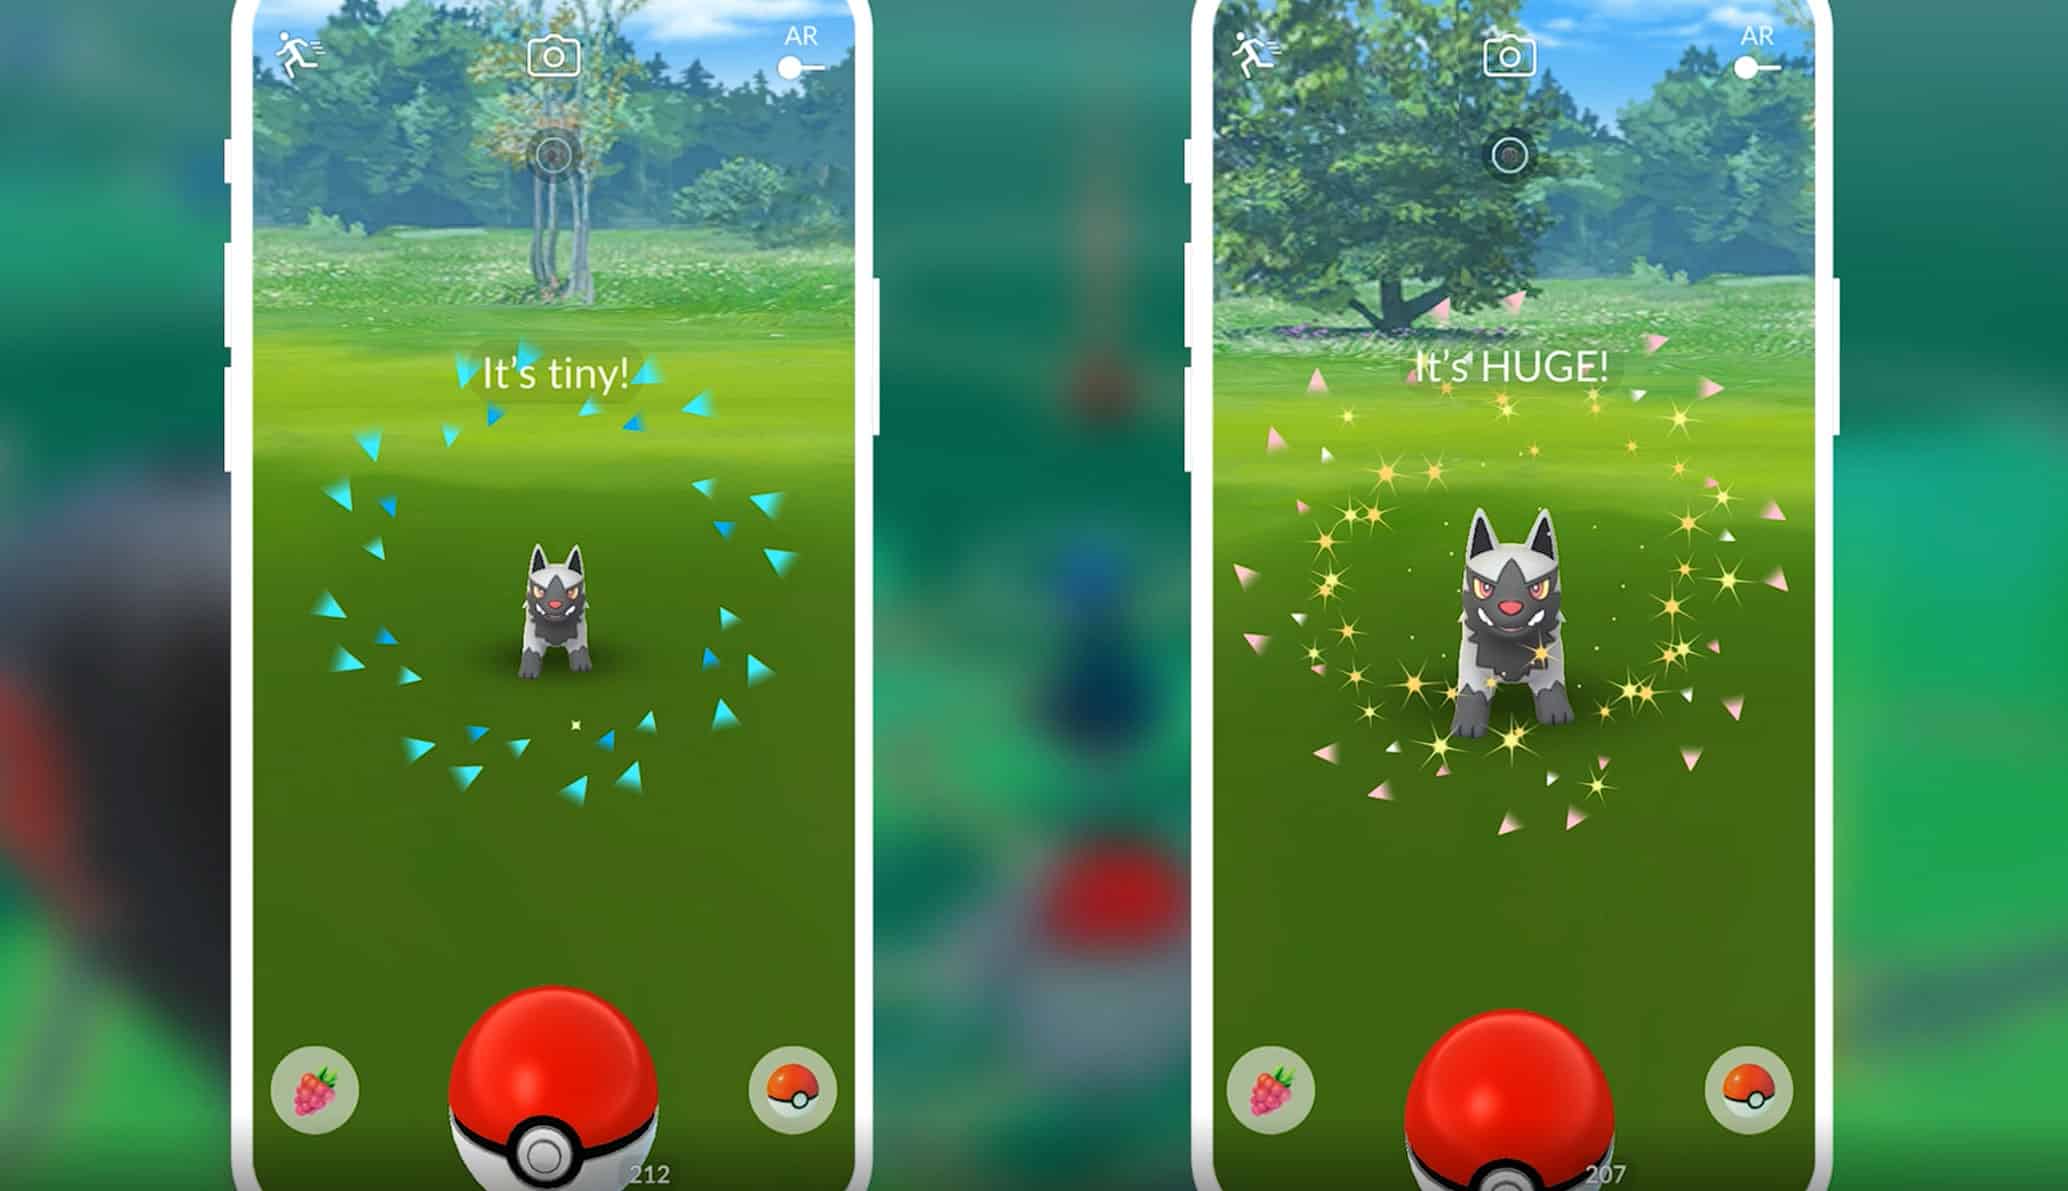 Pokémon GO on X: Ever want to experience what it feels like to